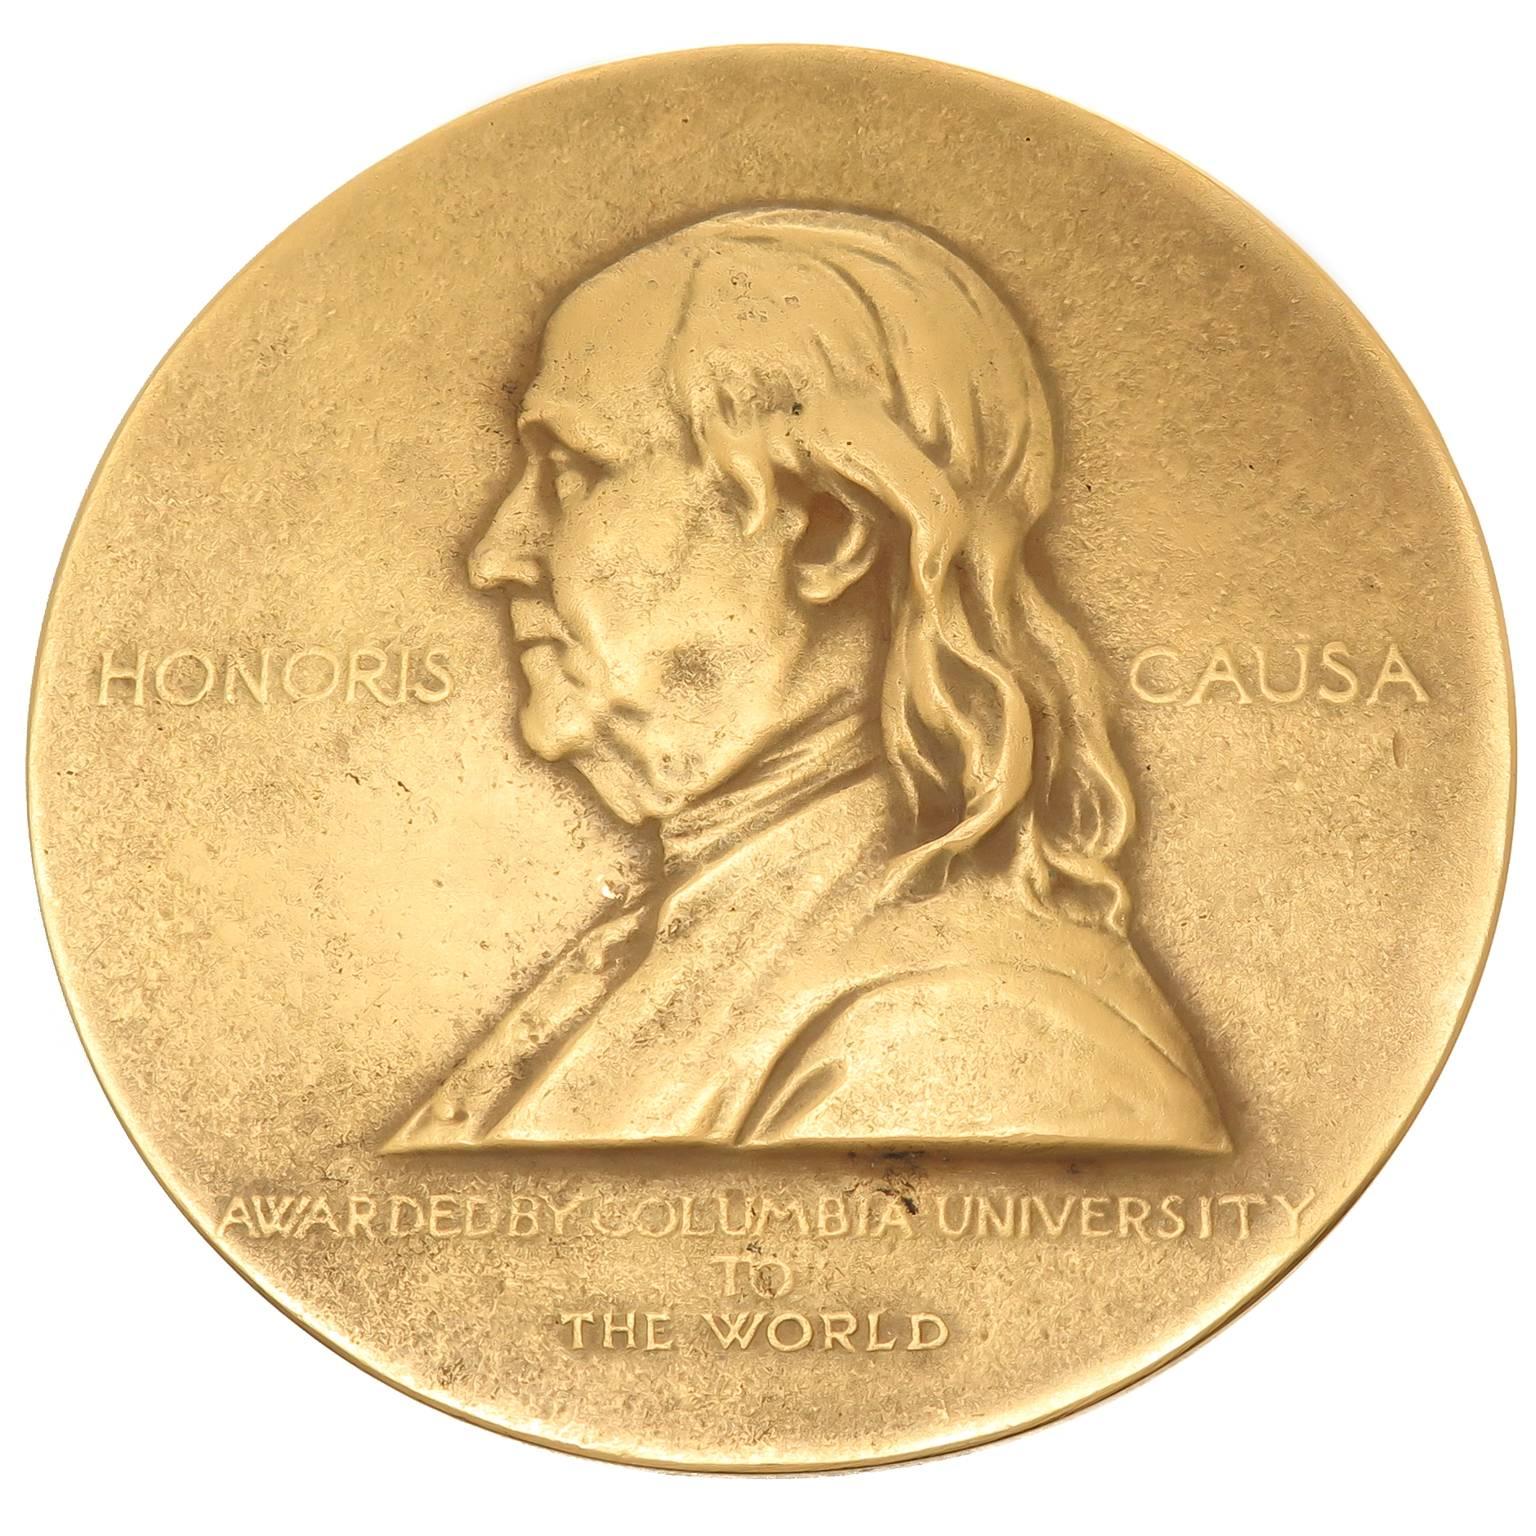 A 1923 Solid yellow Gold Pulitzer Prize medal awarded to The World Newspaper, New York City 1860 to 1931, which Joseph Pulitzer himself was the Chief Publisher. The Pulitzer Prize was Founded and financially sponsored by Joseph Pulitzer and